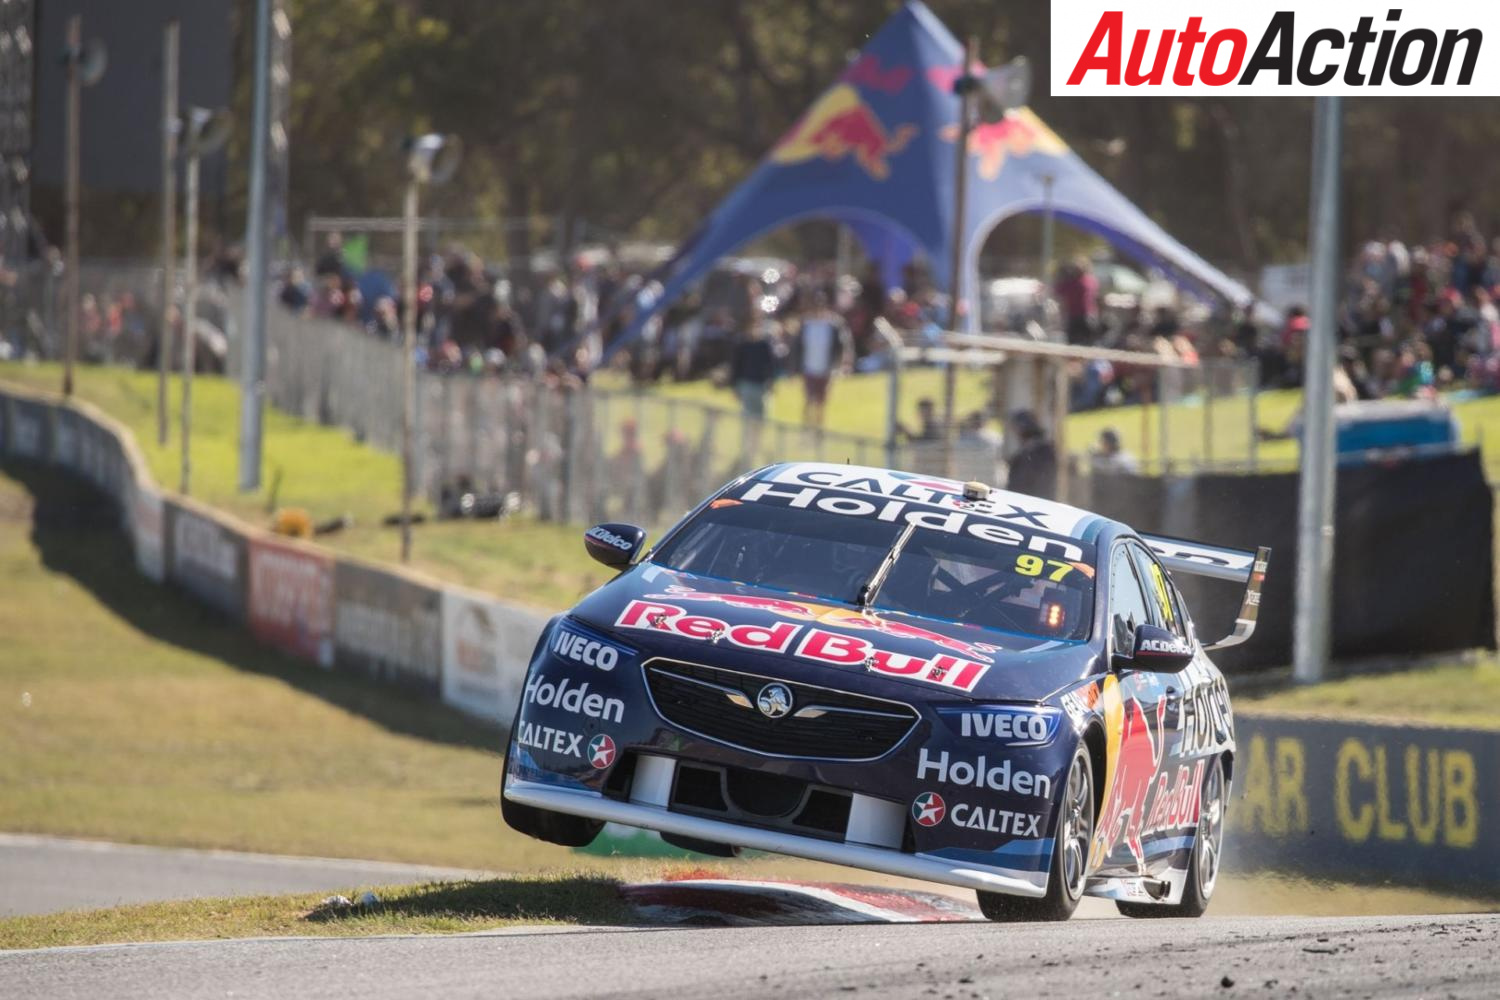 Red Bull didn't make the final ten in qualifying - Photo: Rhys Vandersyde - Auto Action